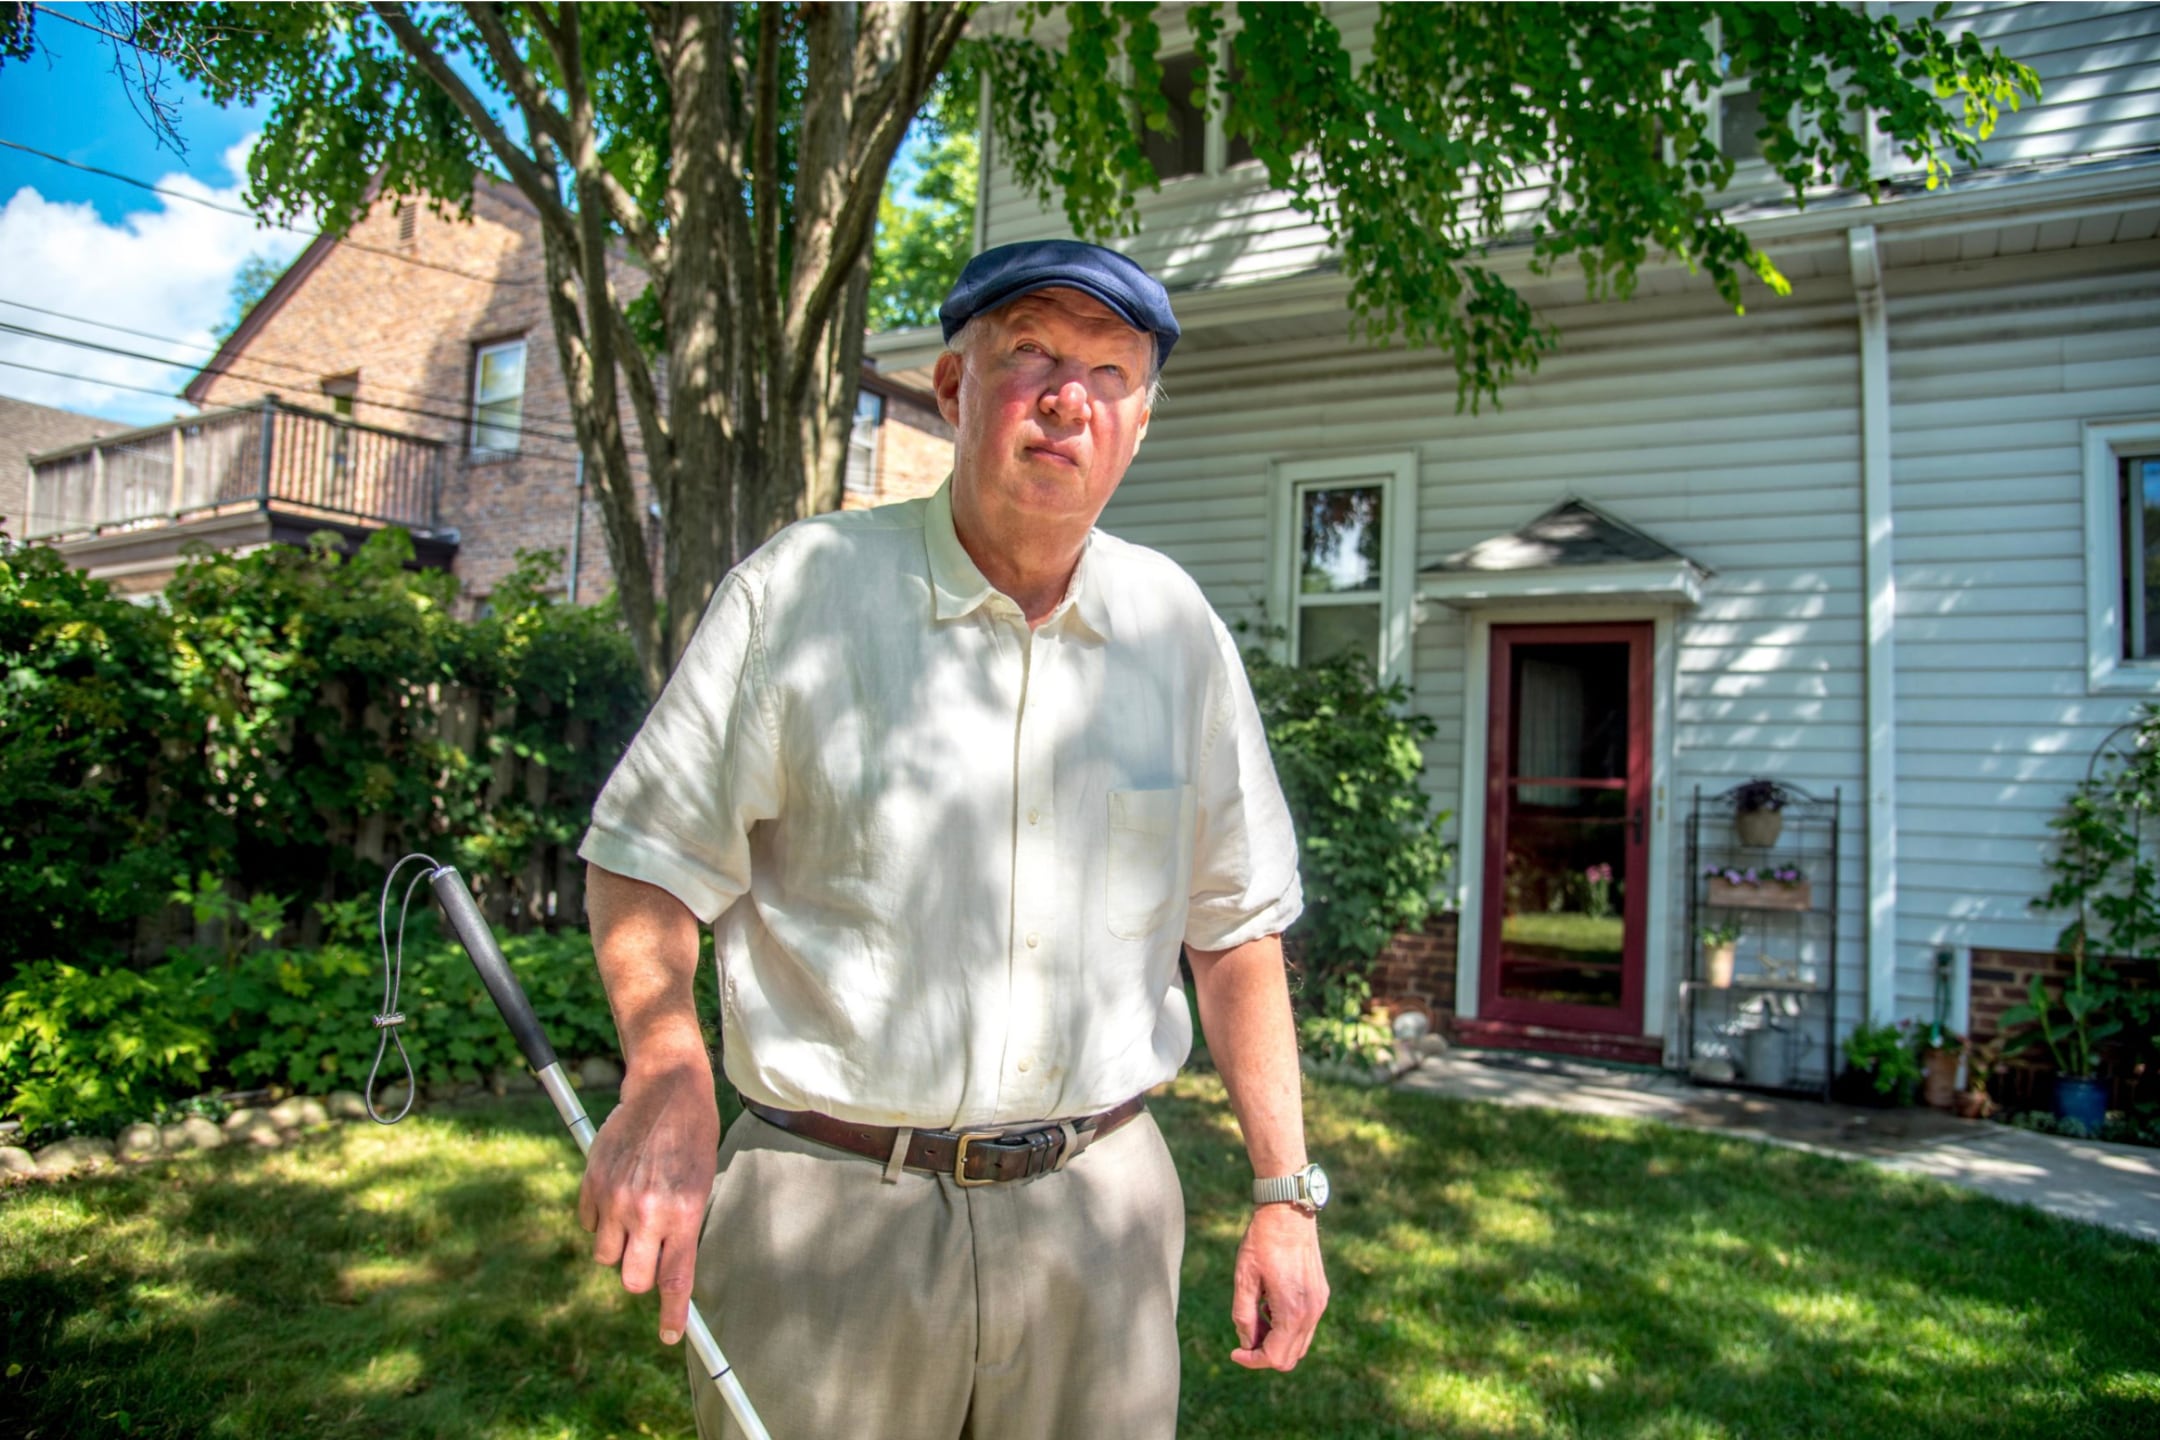 A man wearing a blue hat, a white shirt and holding a walking stick as a mobility device, stands in his green backyard with a large tree and a house in the background.